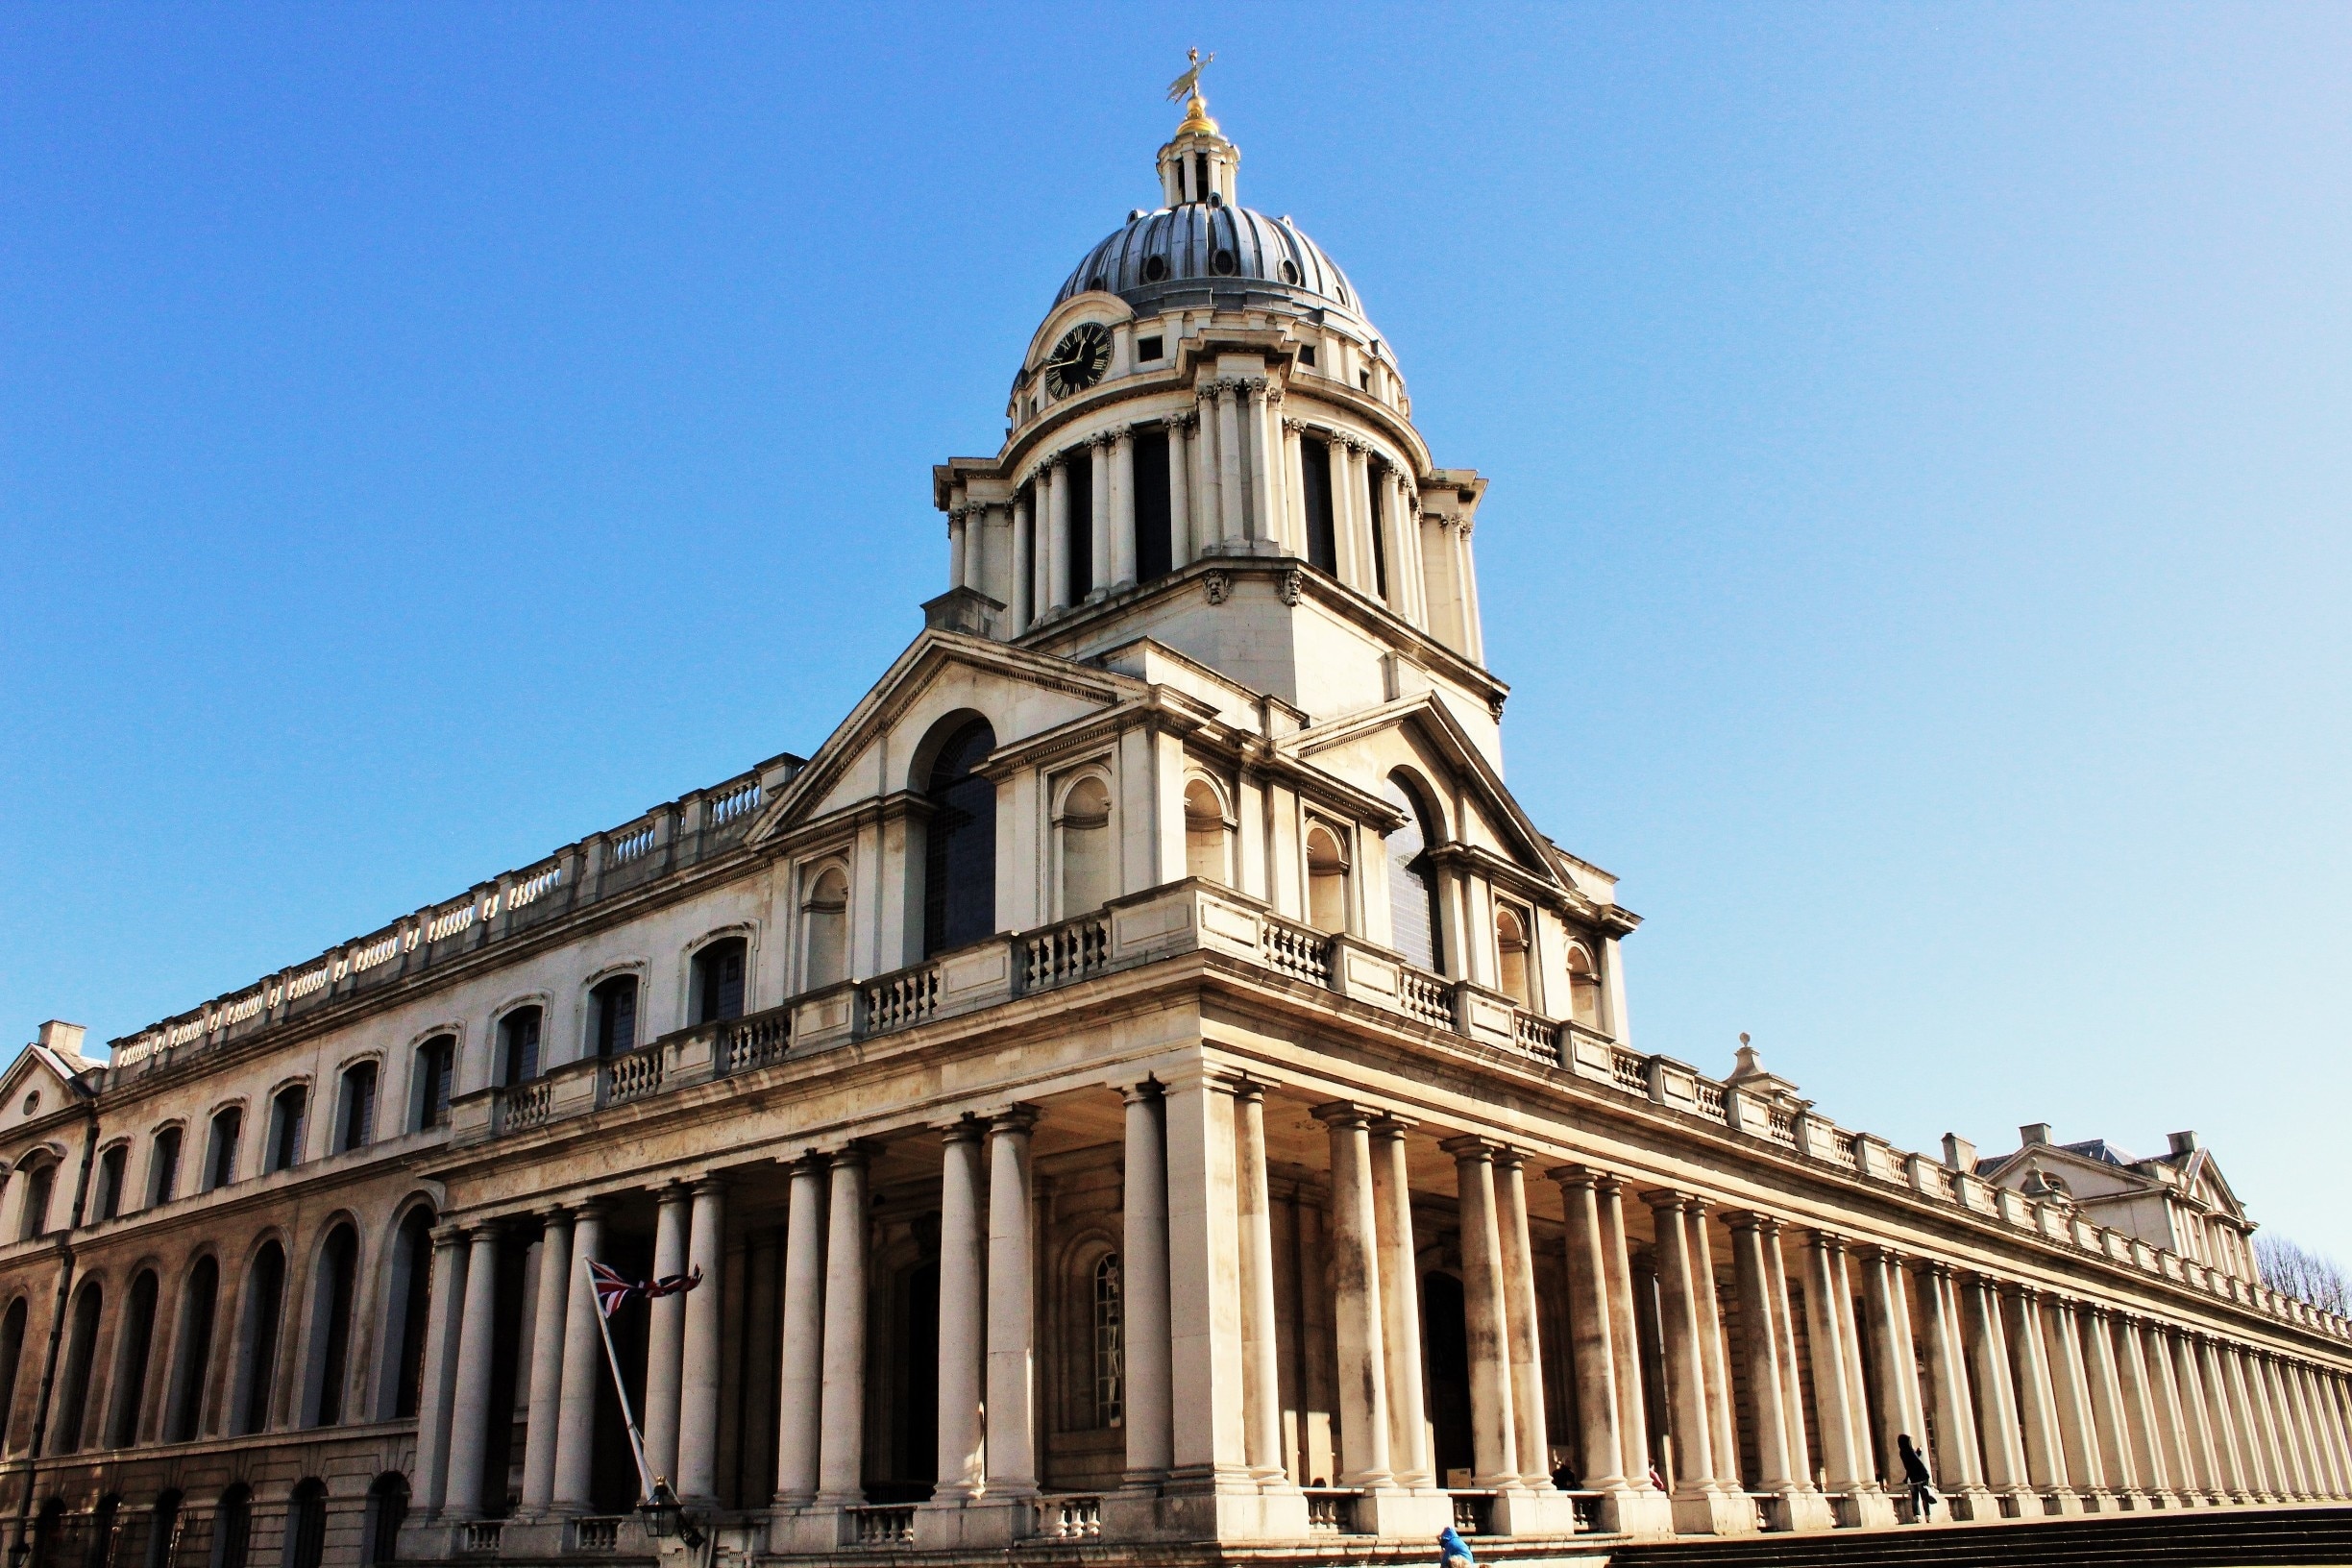 Seeped in History is Greenwich at the outskirts of London.

Majestic and stunning architecture of Old Royal Naval College at Greenwich. Worth a visit.